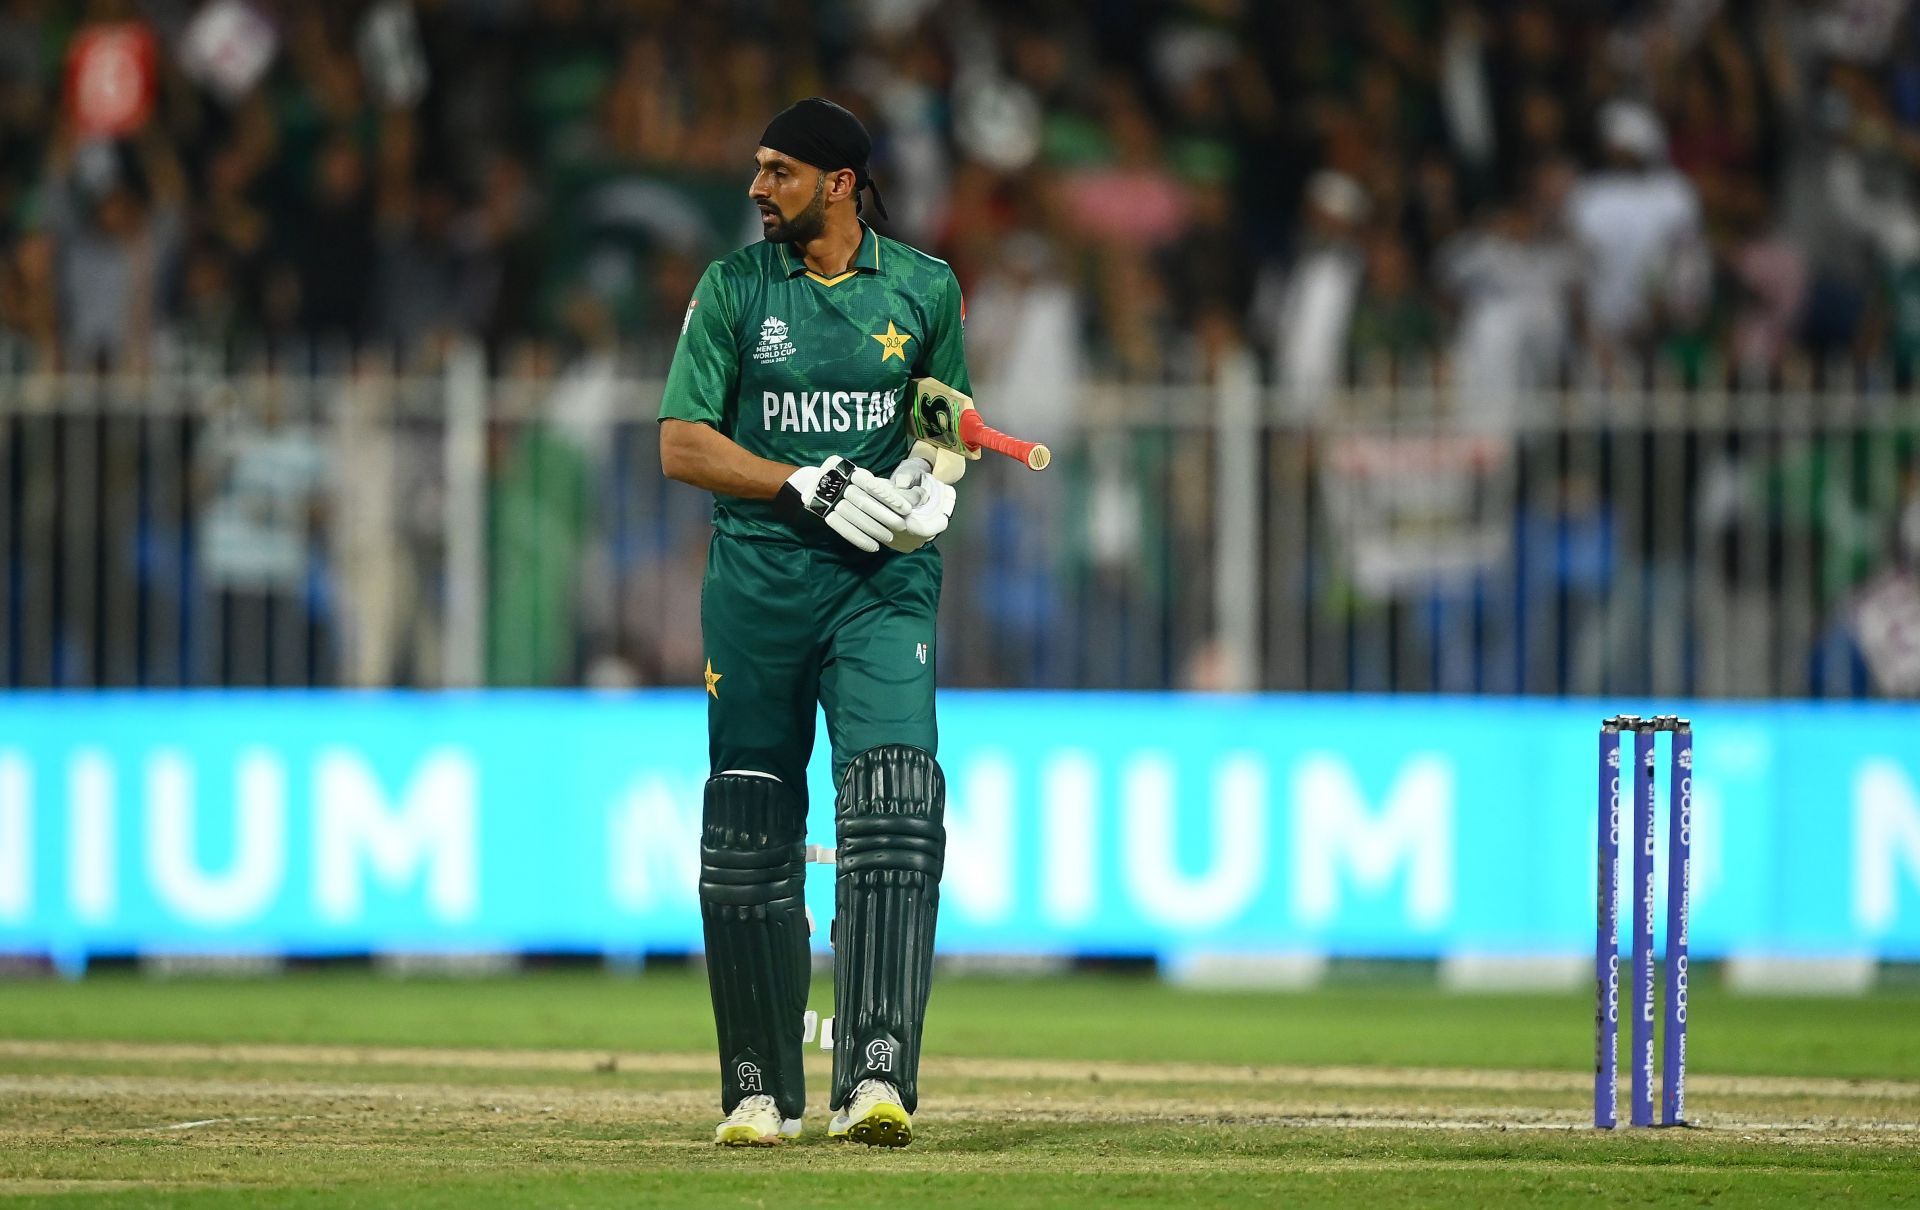 Shoaib Malik has been a valuable player for Pakistan